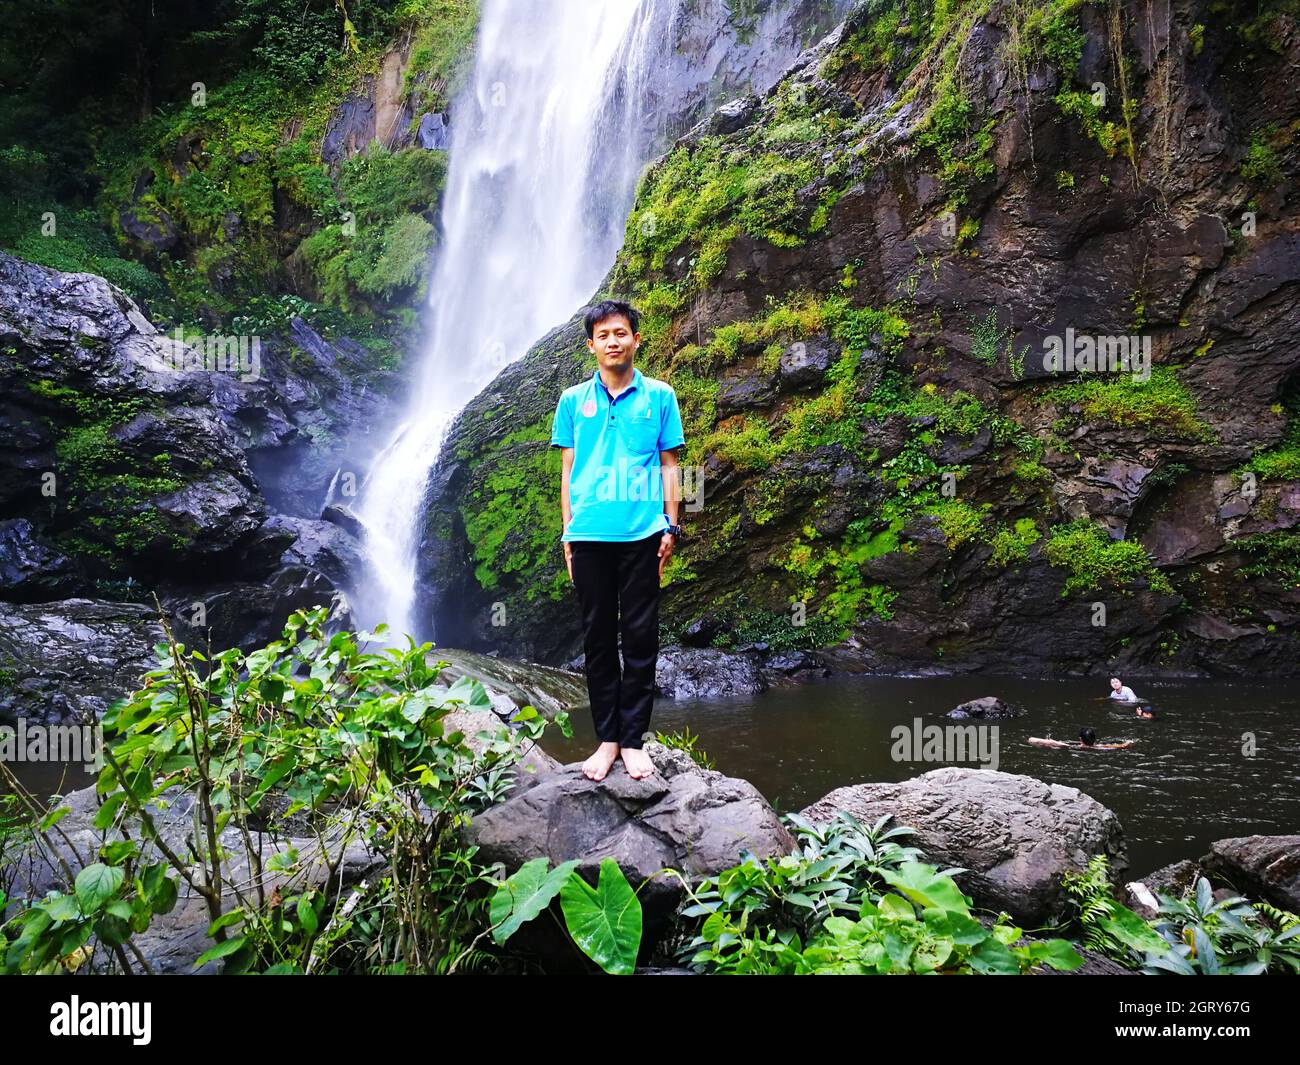 Low Angle View Of Mid Adult Man Standing On Rock Against Waterfall Stock Photo